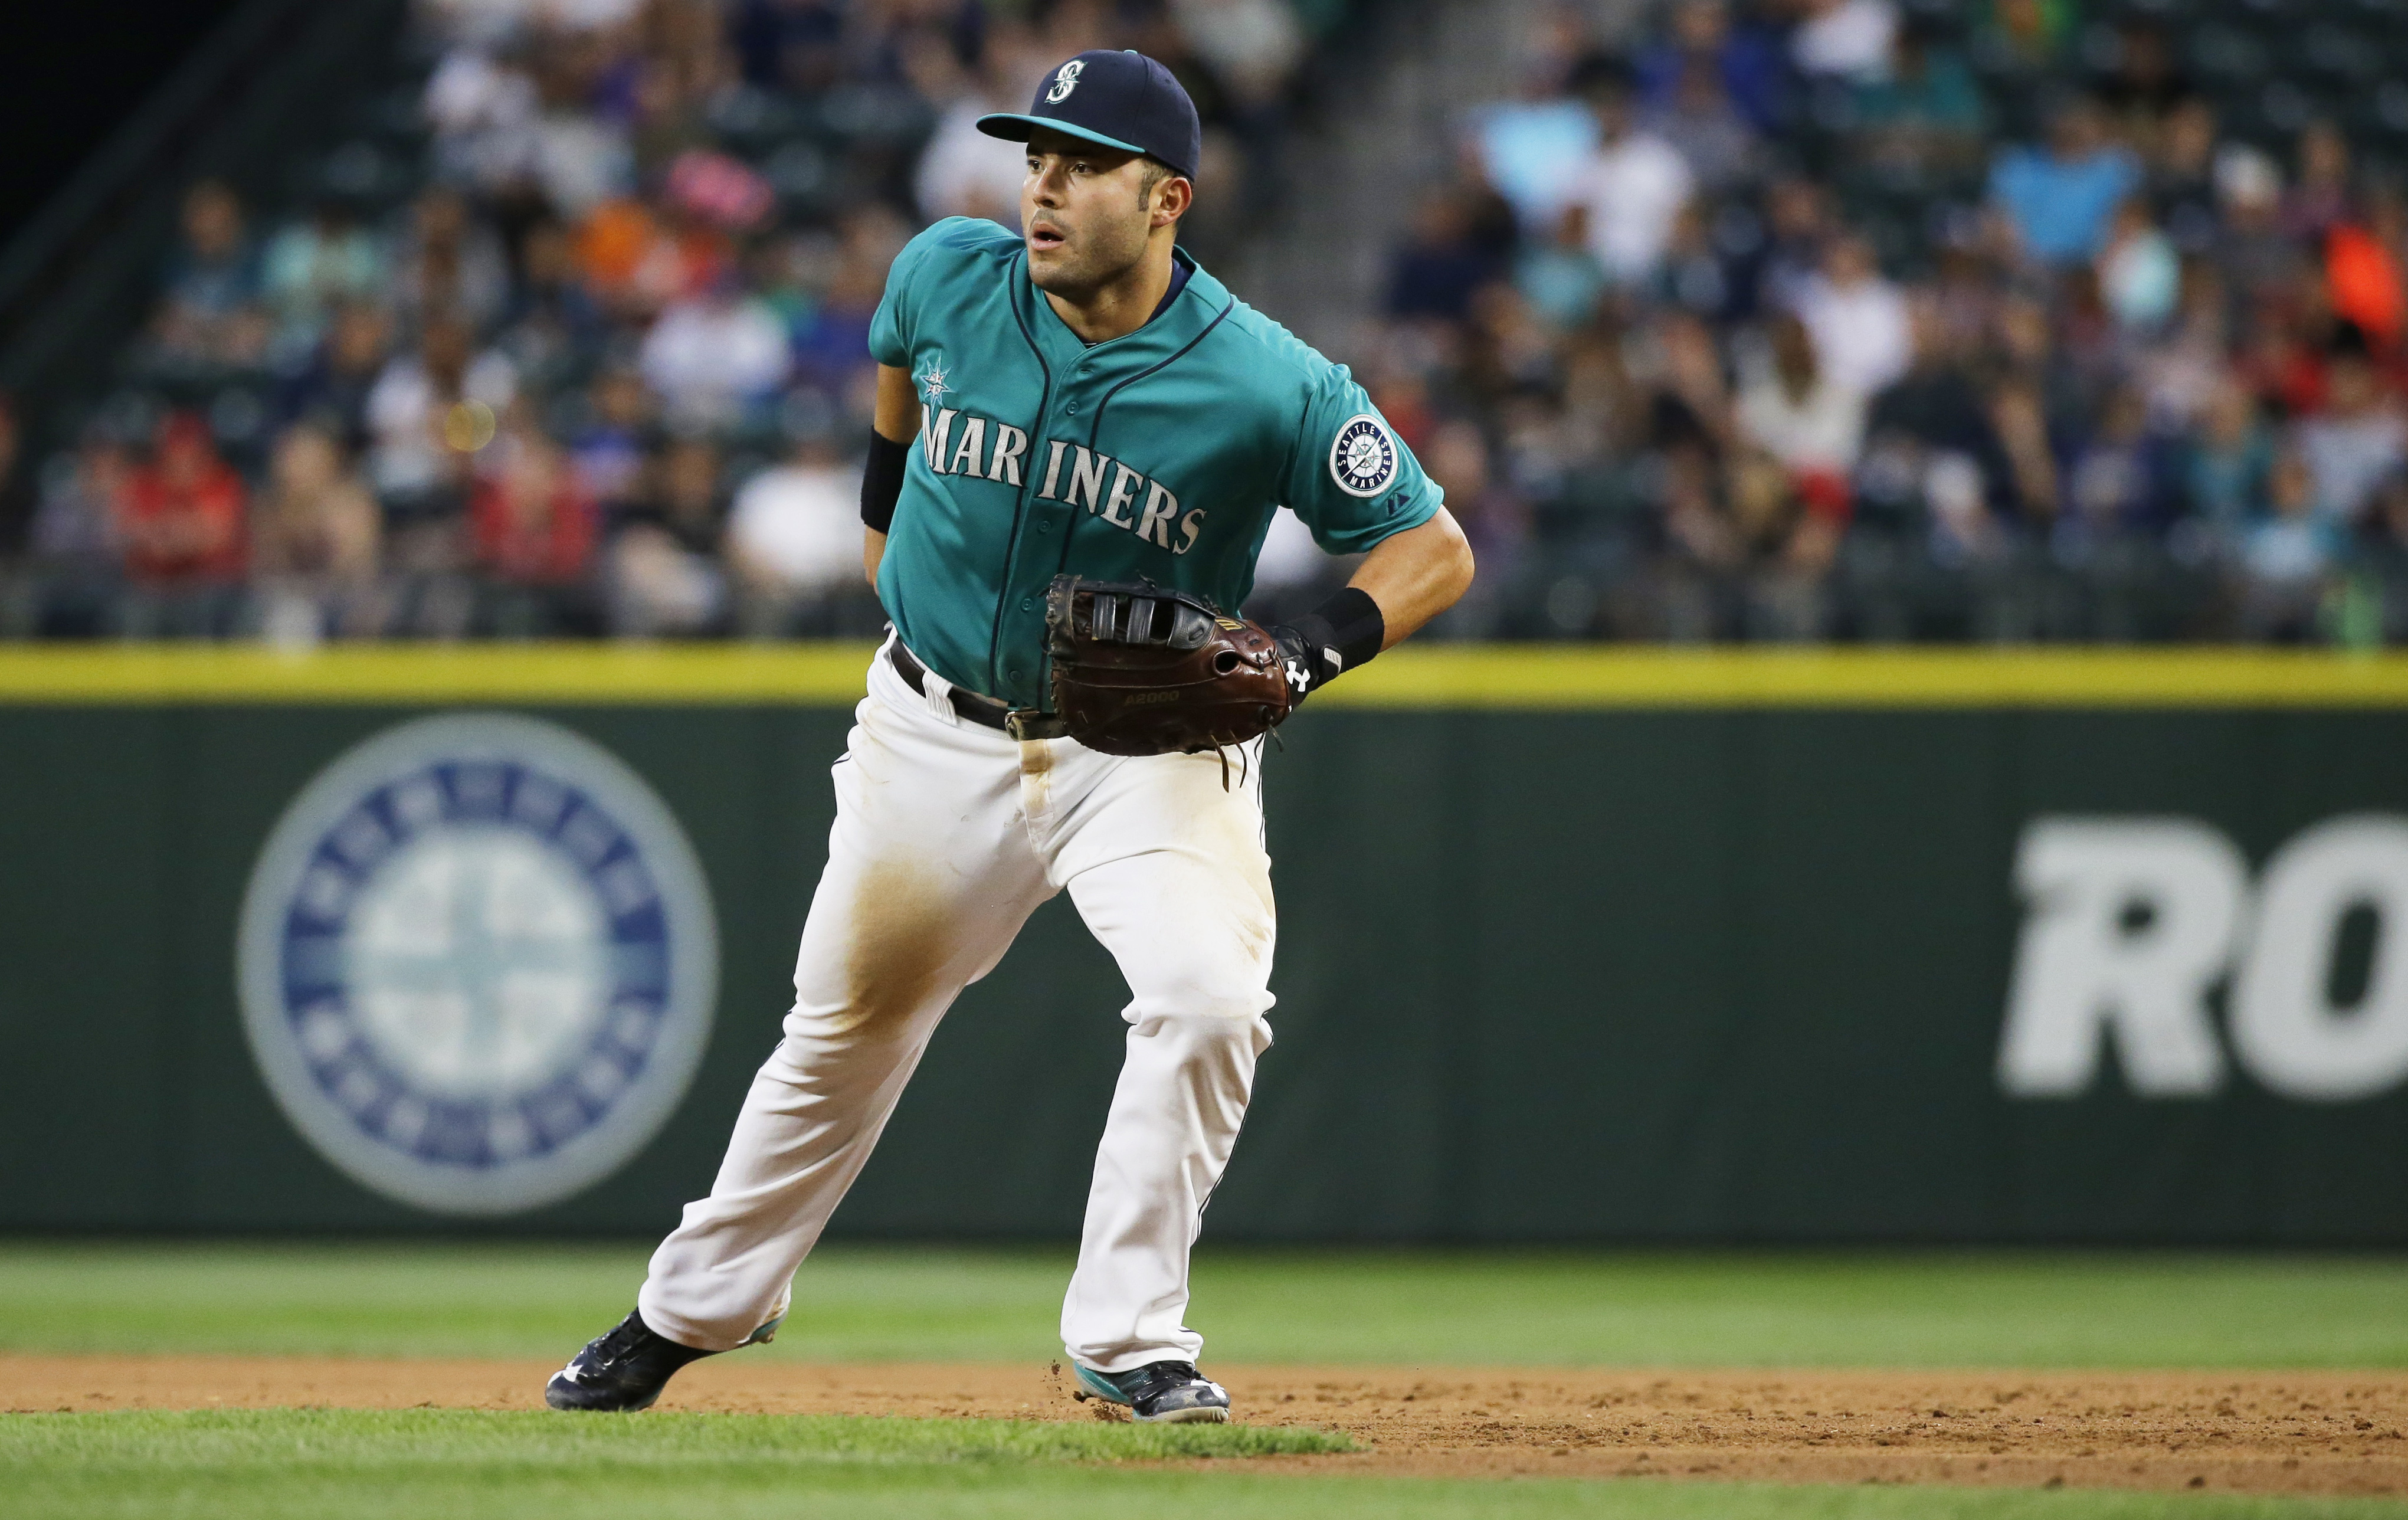 Seattle Mariners first baseman Jesus Montero moves toward the base on a play in the fourth inning of a baseball game against the Los Angeles Angels, Friday, July 10, 2015, in Seattle. (AP Photo/Ted S. Warren) ORG XMIT: WATW112